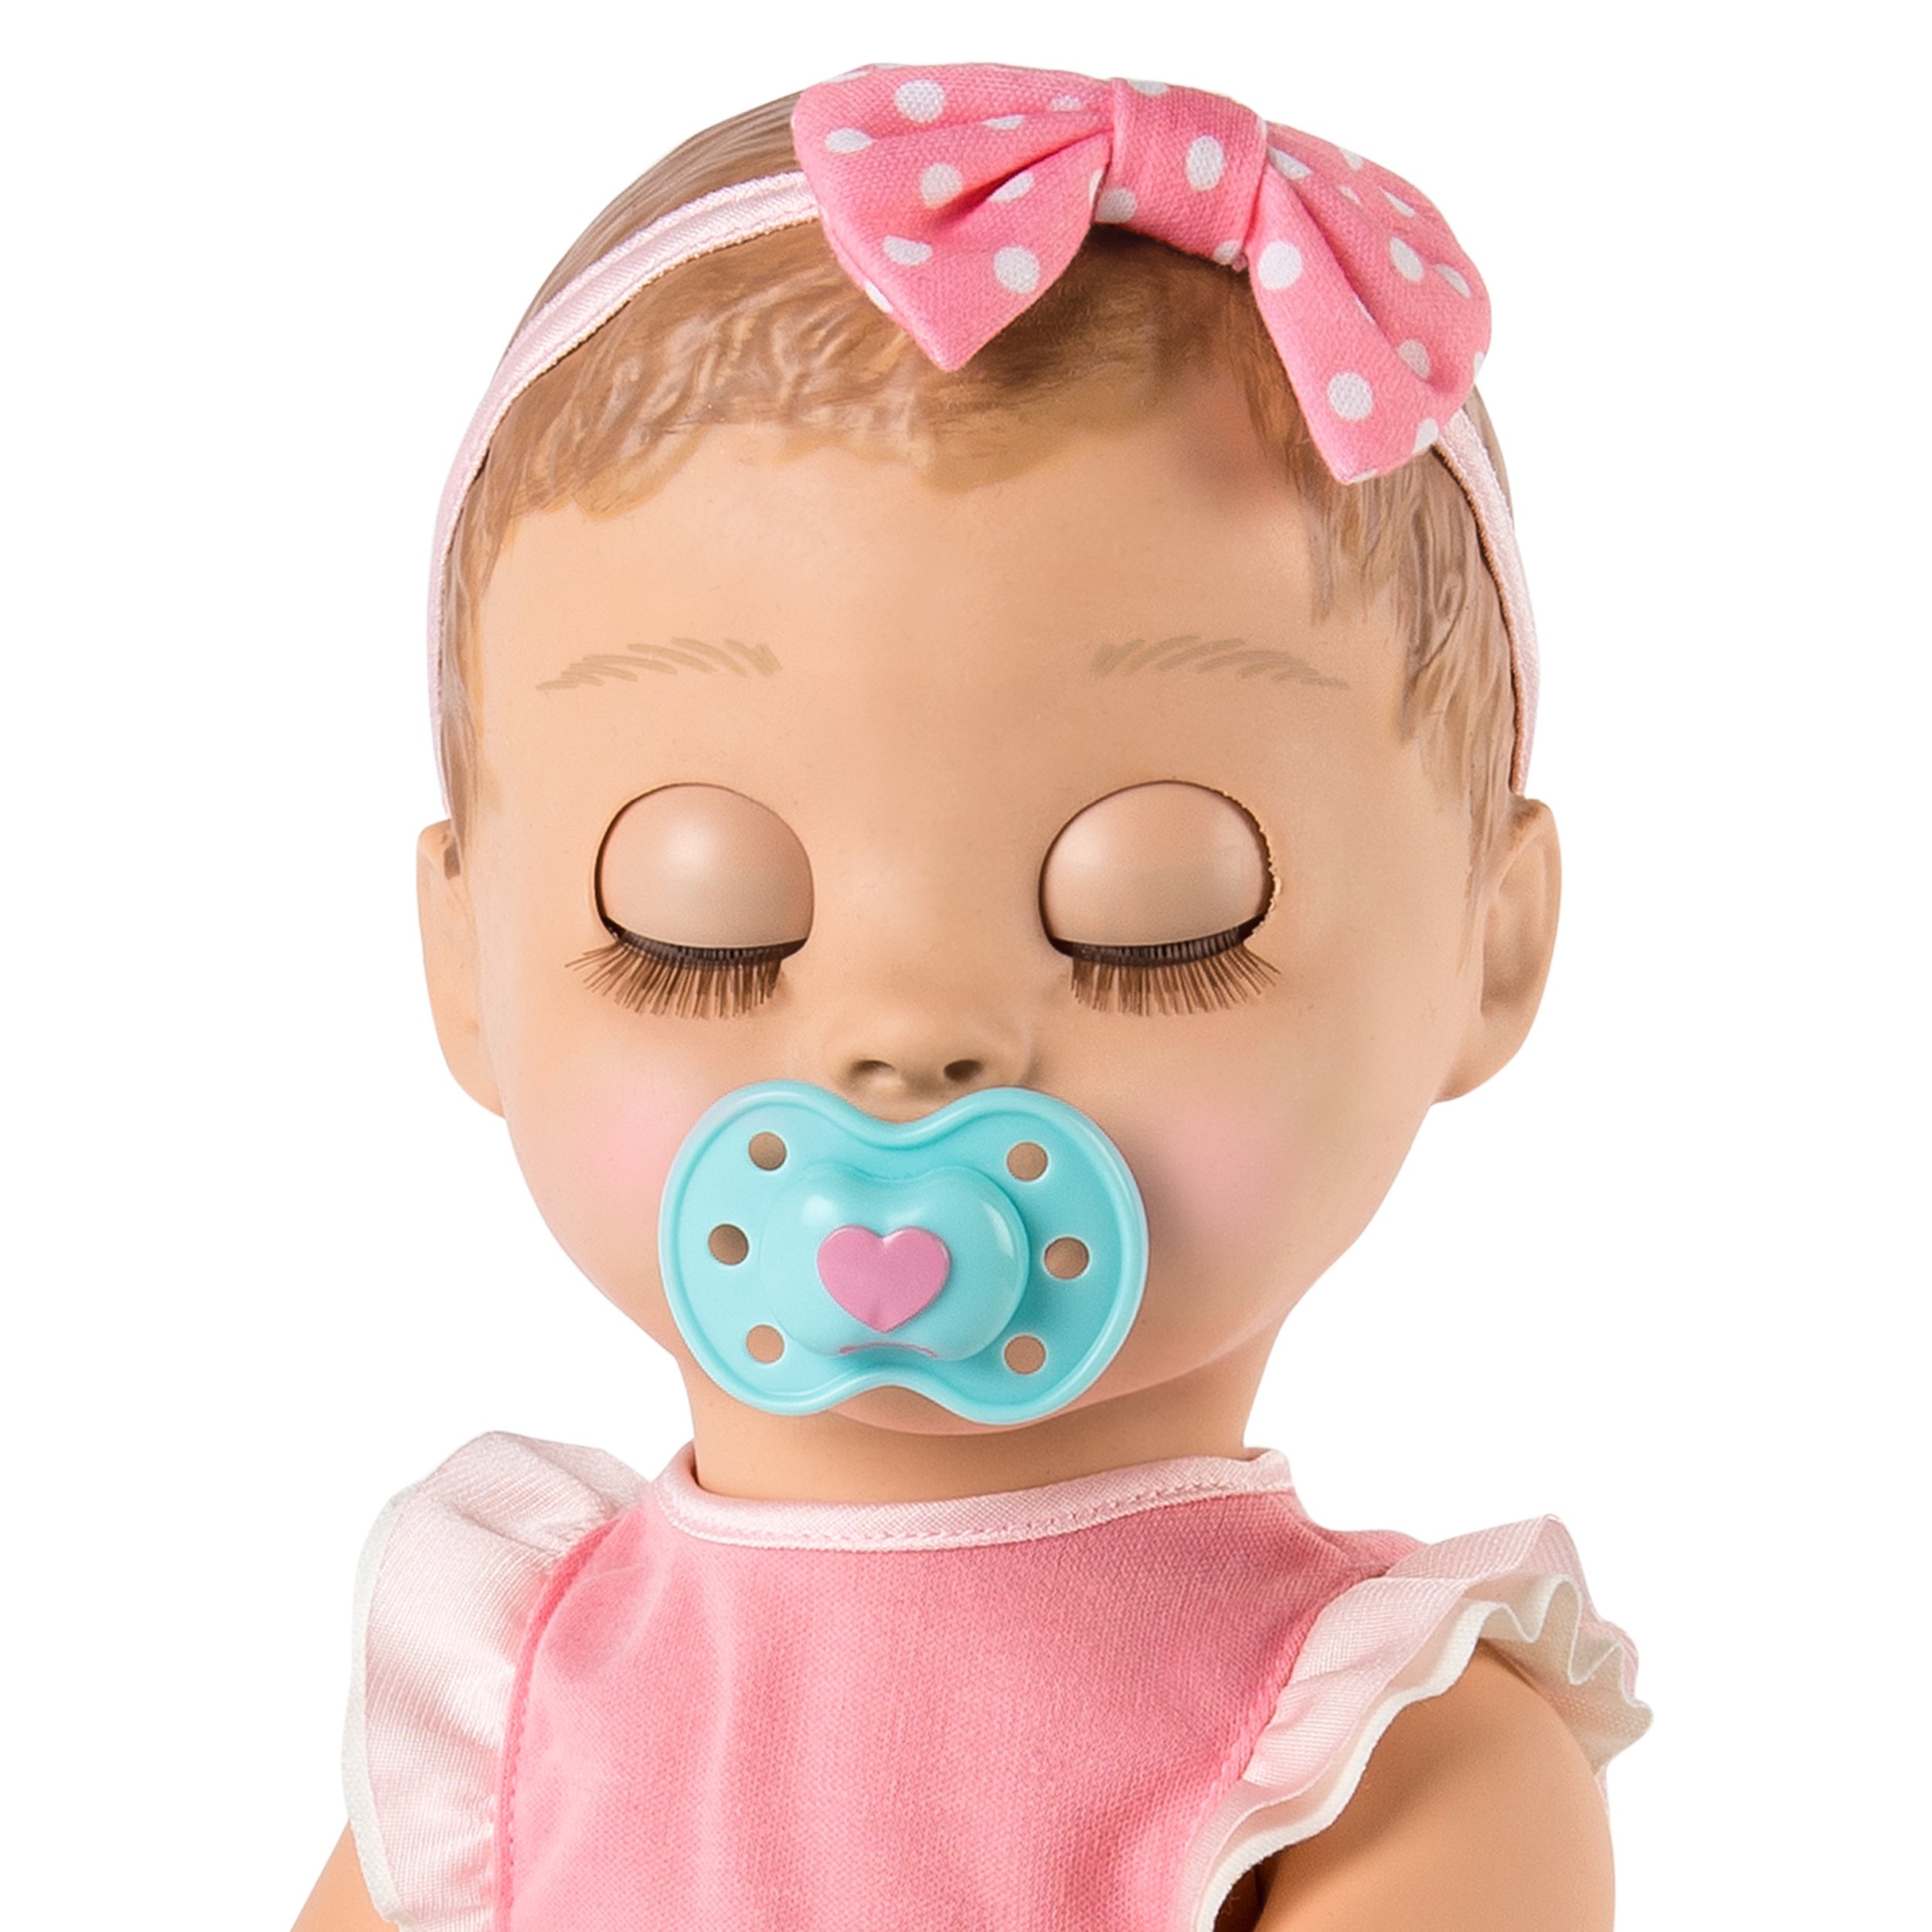 Luvabella - Blonde Hair - Responsive Baby Doll with Realistic Expressions and Movement - image 3 of 8